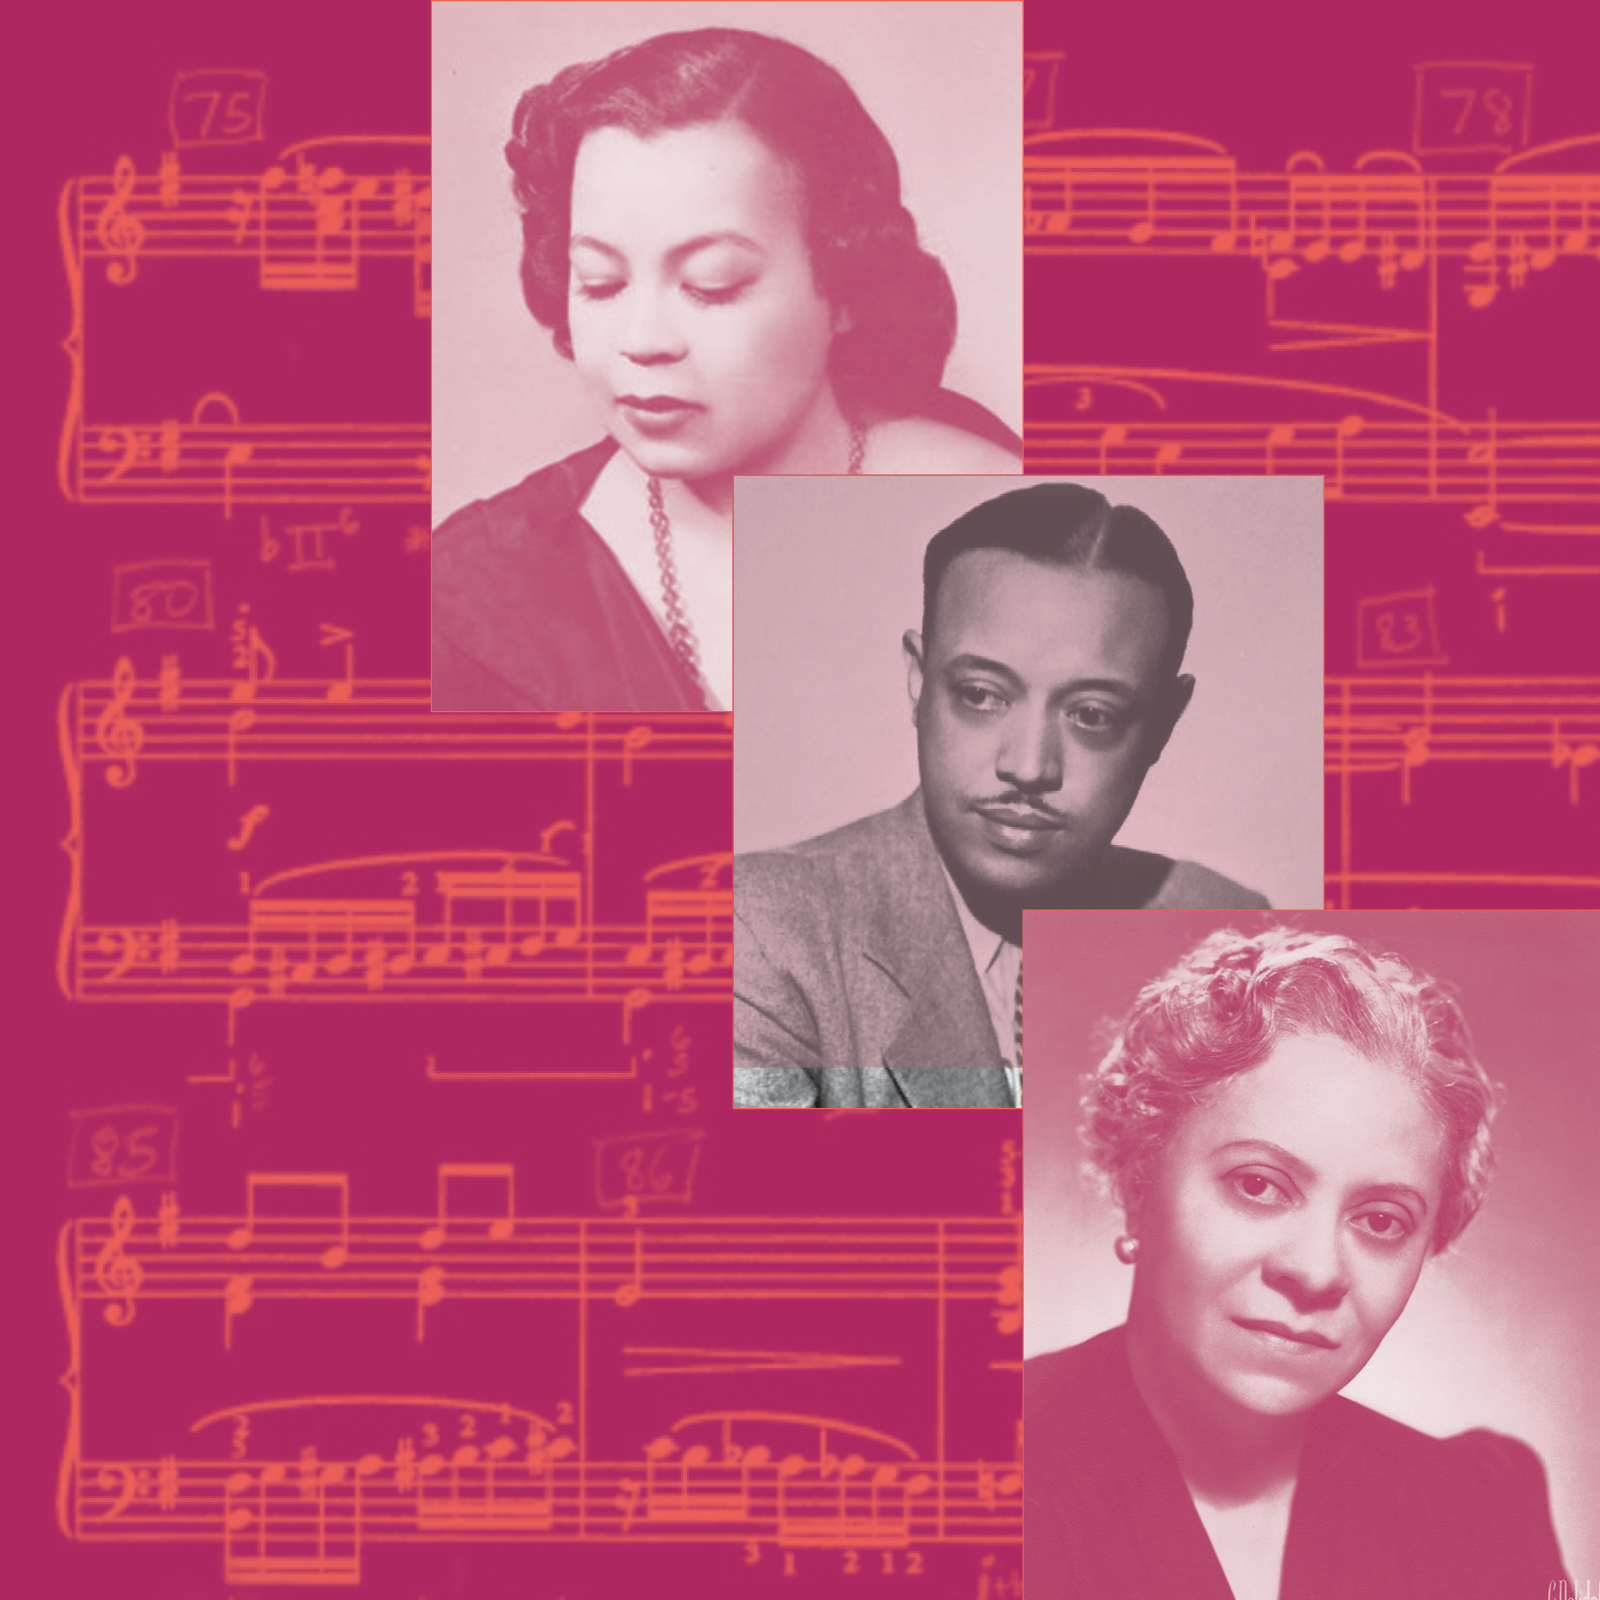 Top to bottom: Margaret Bonds, William Grant Still, and Florence Price